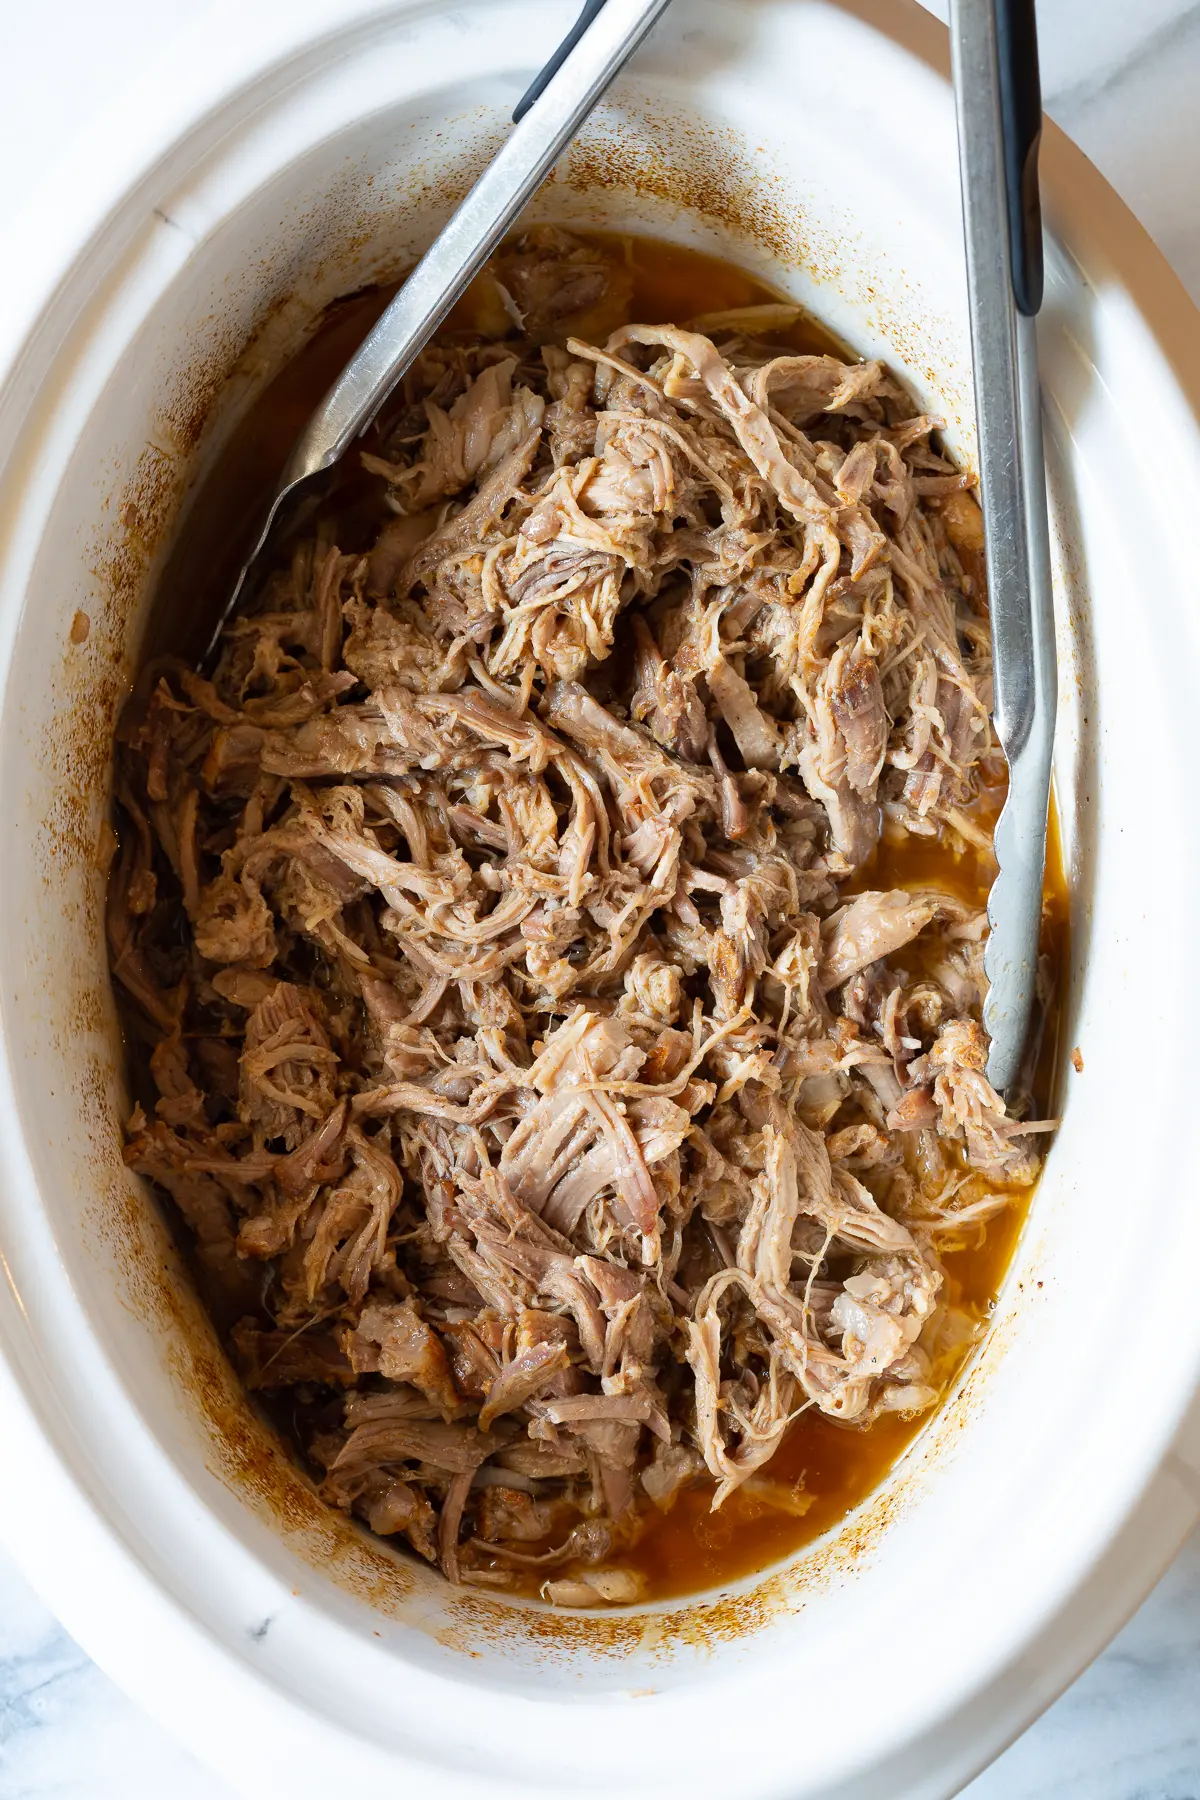 smoked pulled pork crock pot - Can you smoke pulled pork and finish in crock pot